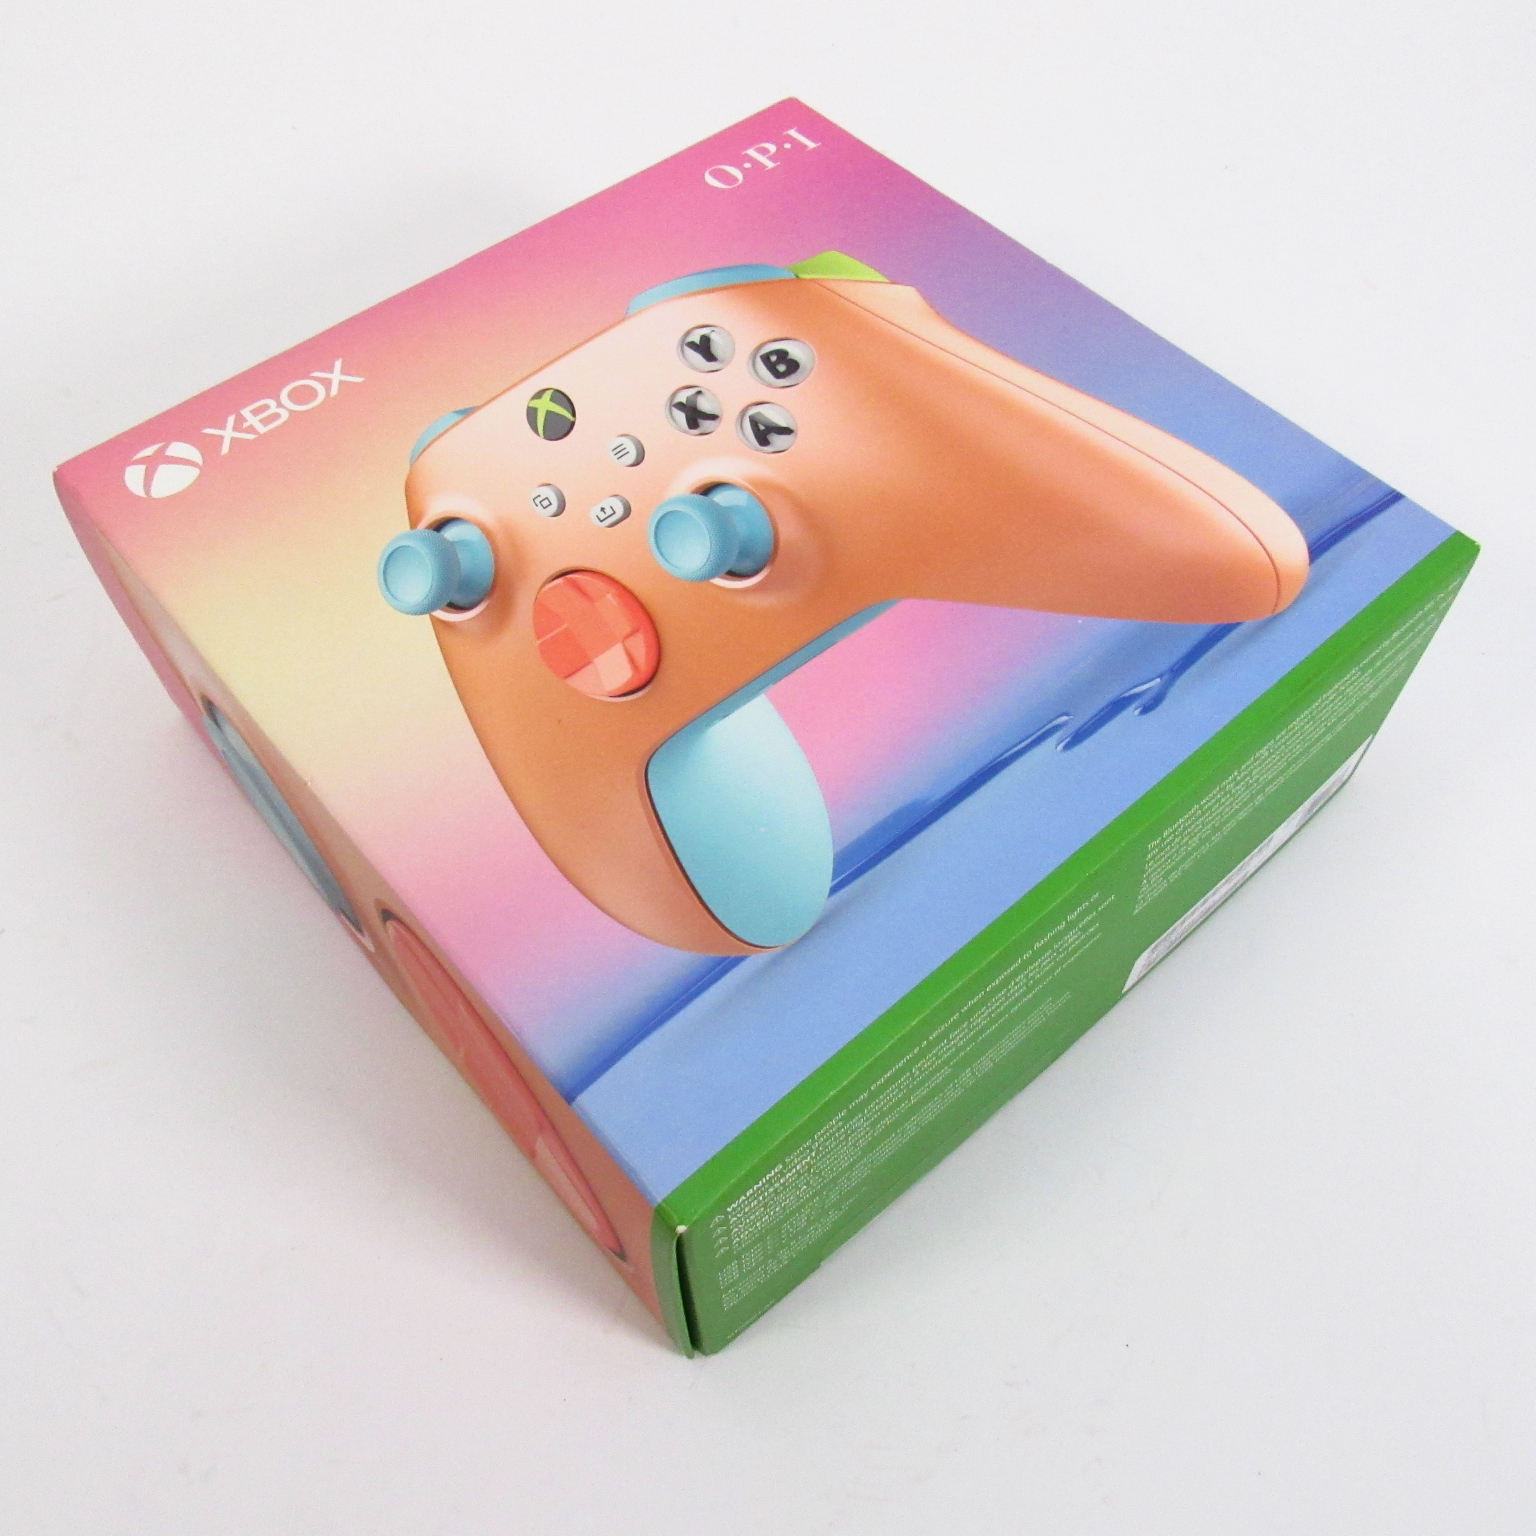 Controller 1914 Xbox - Vibes Microsoft O.P.I. Sunkissed Wireless Edition Special